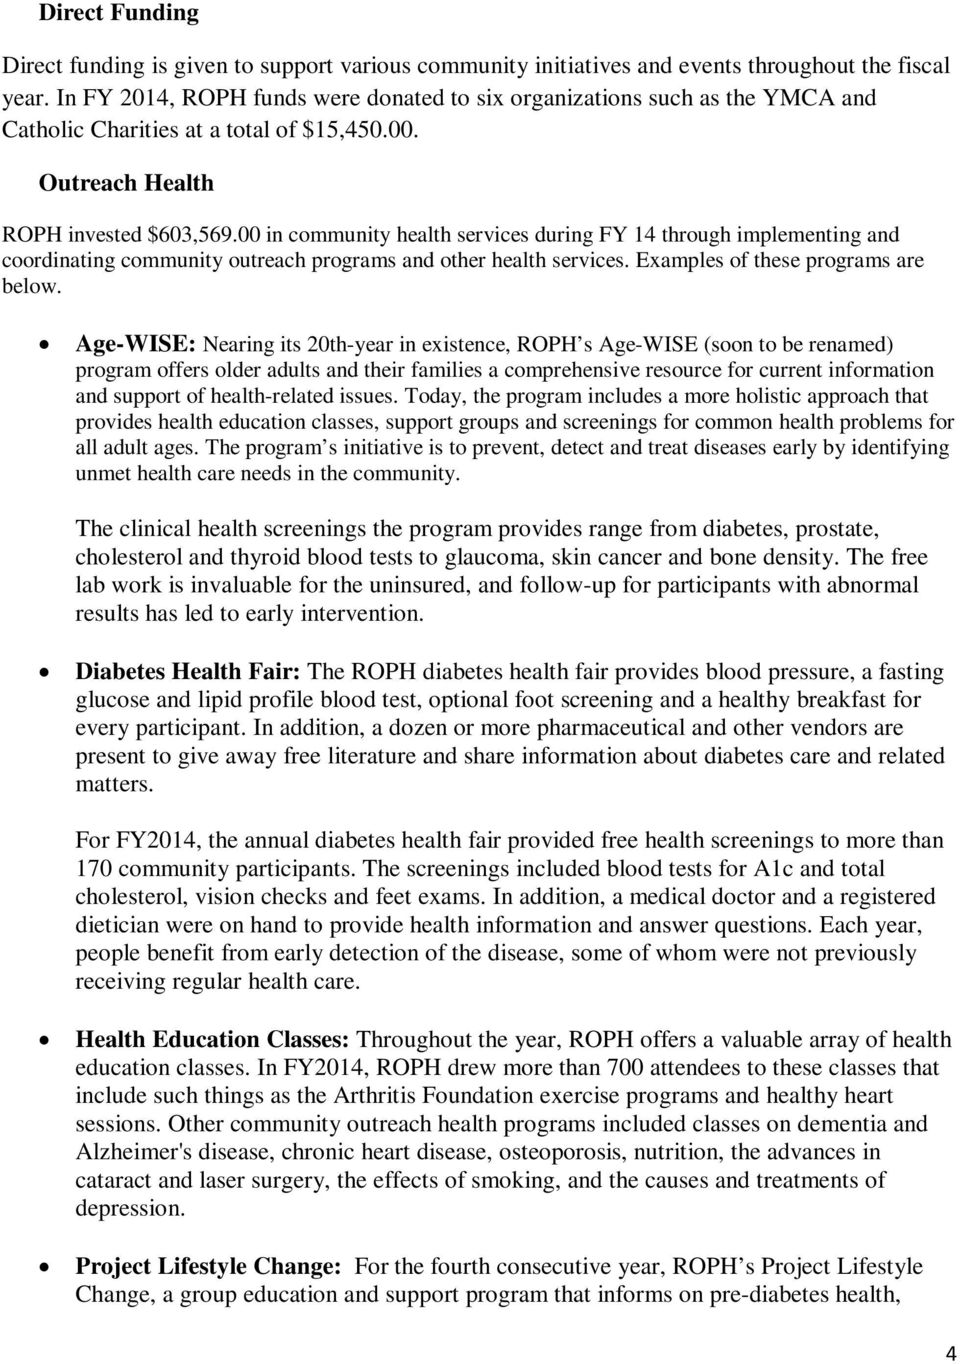 00 in community health services during FY 14 through implementing and coordinating community outreach programs and other health services. Examples of these programs are below.